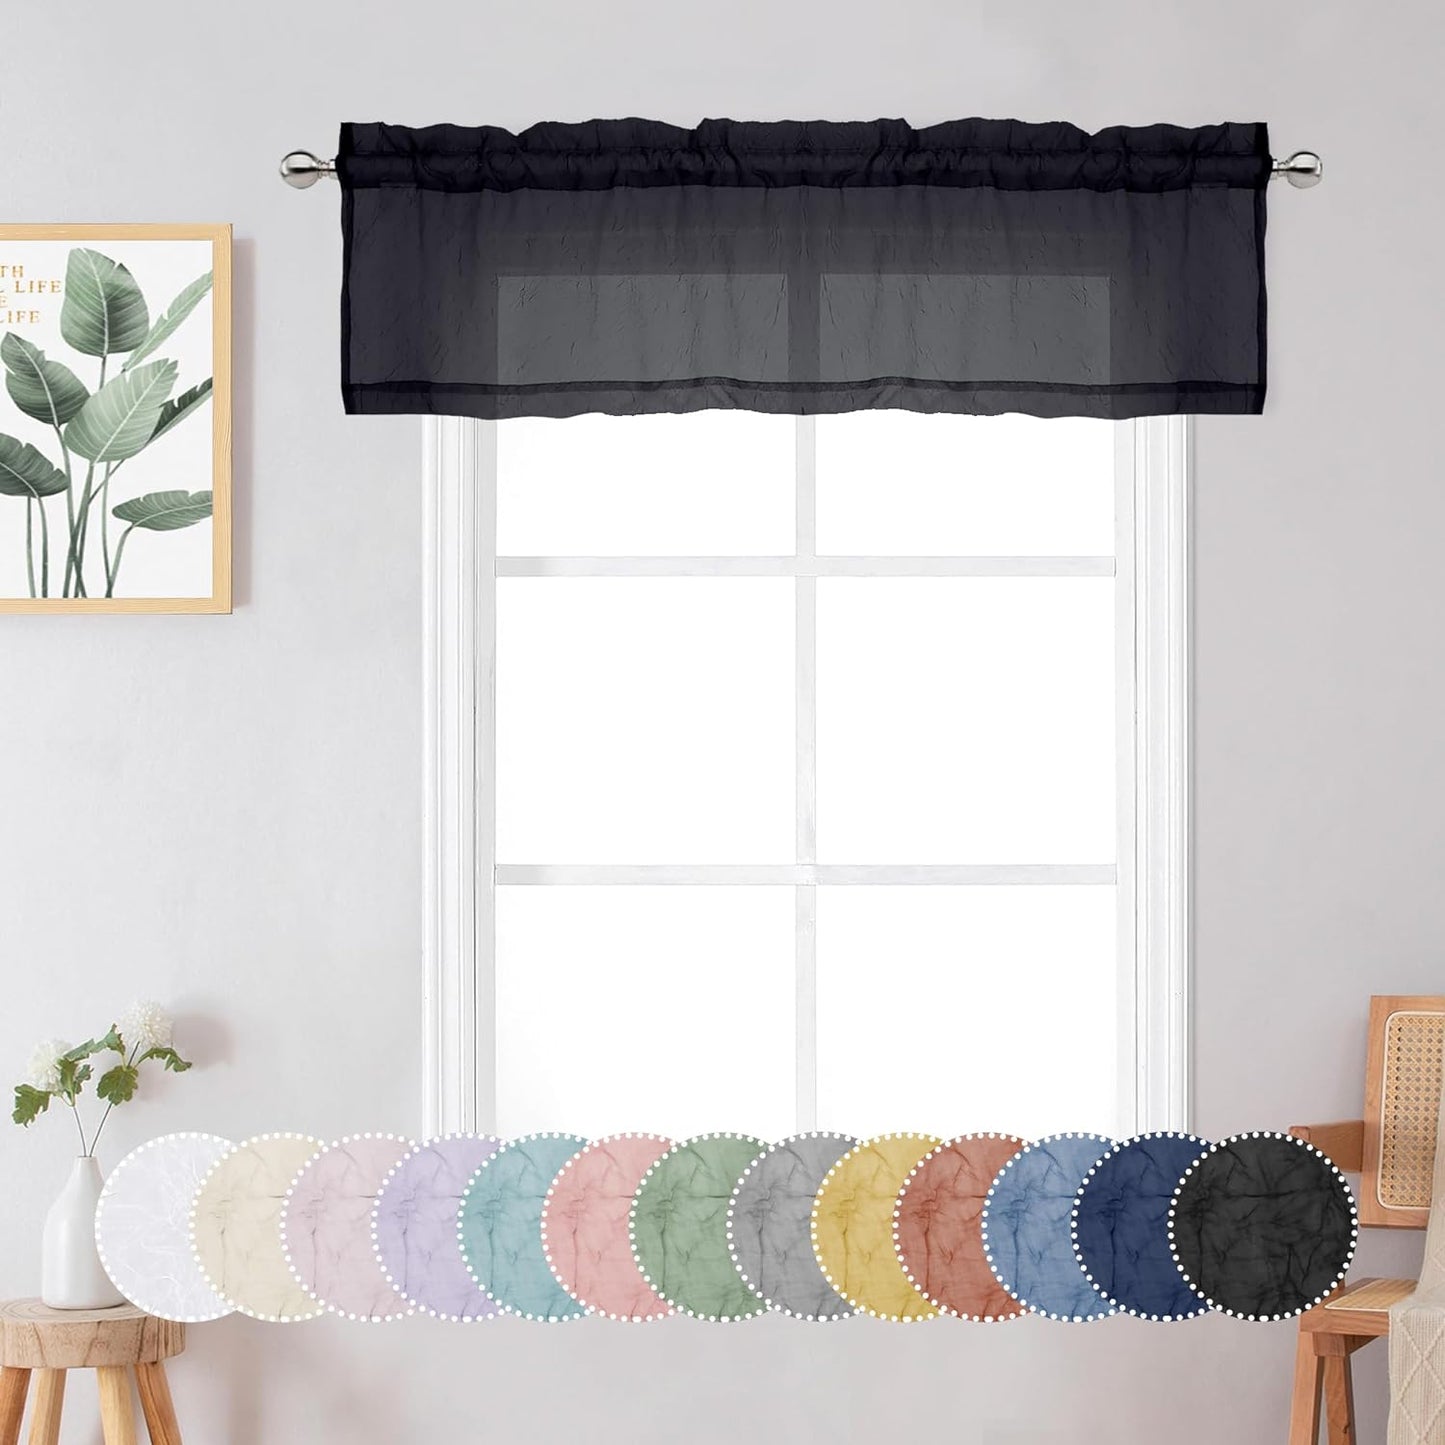 Chyhomenyc Crushed White Sheer Valances for Window 14 Inch Length 2 PCS, Crinkle Voile Short Kitchen Curtains with Dual Rod Pockets，Gauzy Bedroom Curtain Valance，Each 42Wx14L Inches  Chyhomenyc Black 42 W X 14 L 